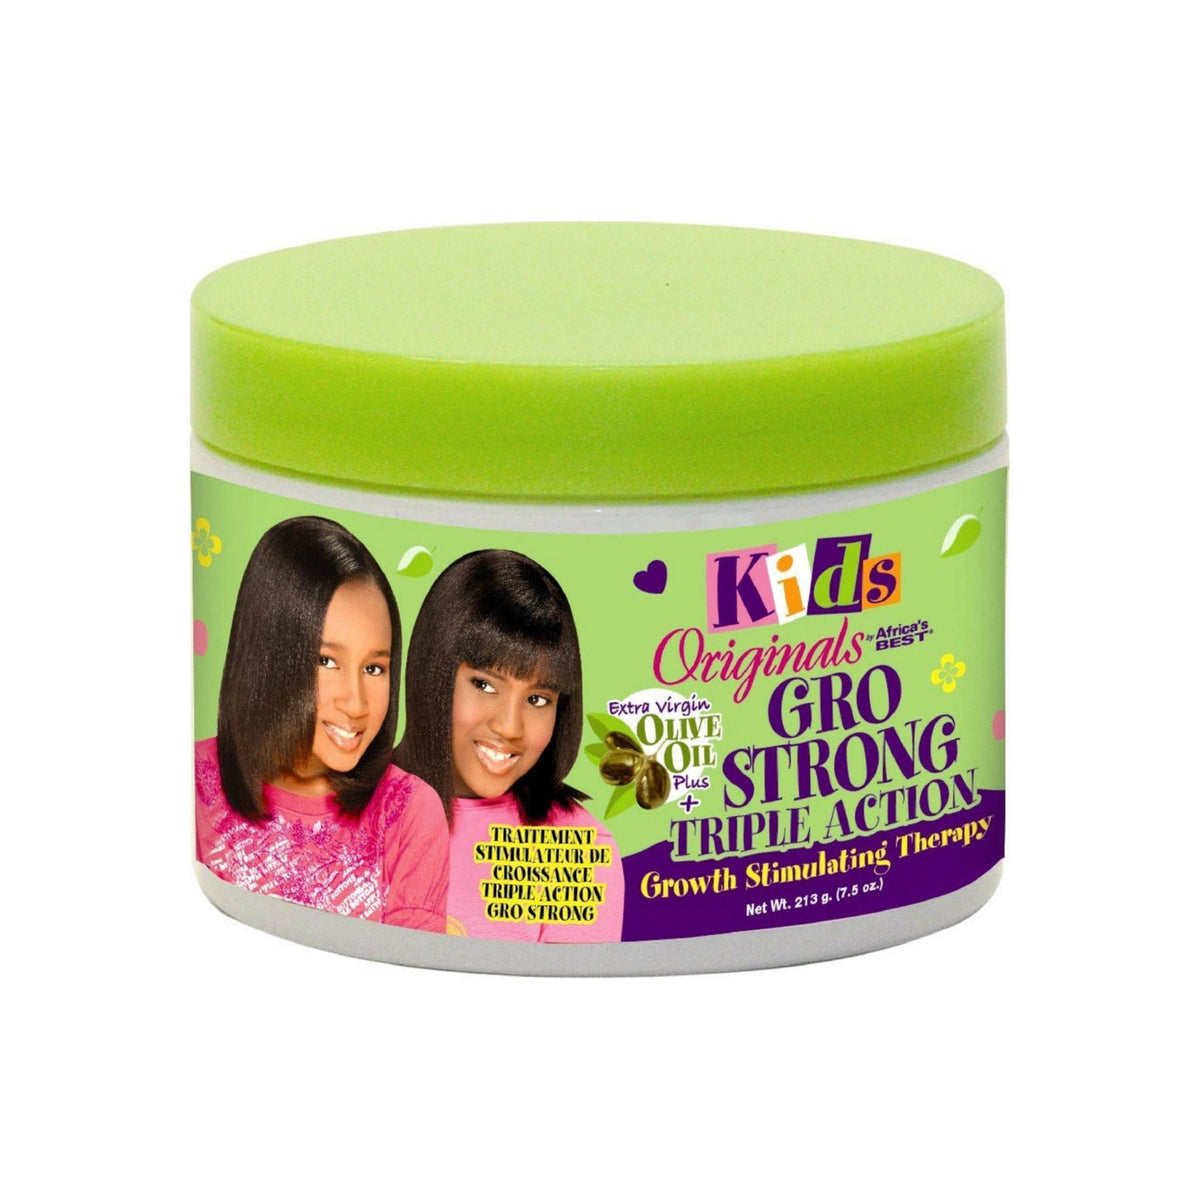 Kids Organics by Africa&#39;s Best GRO STRONG Triple Action Growth Stimulating Therapy 7.5oz